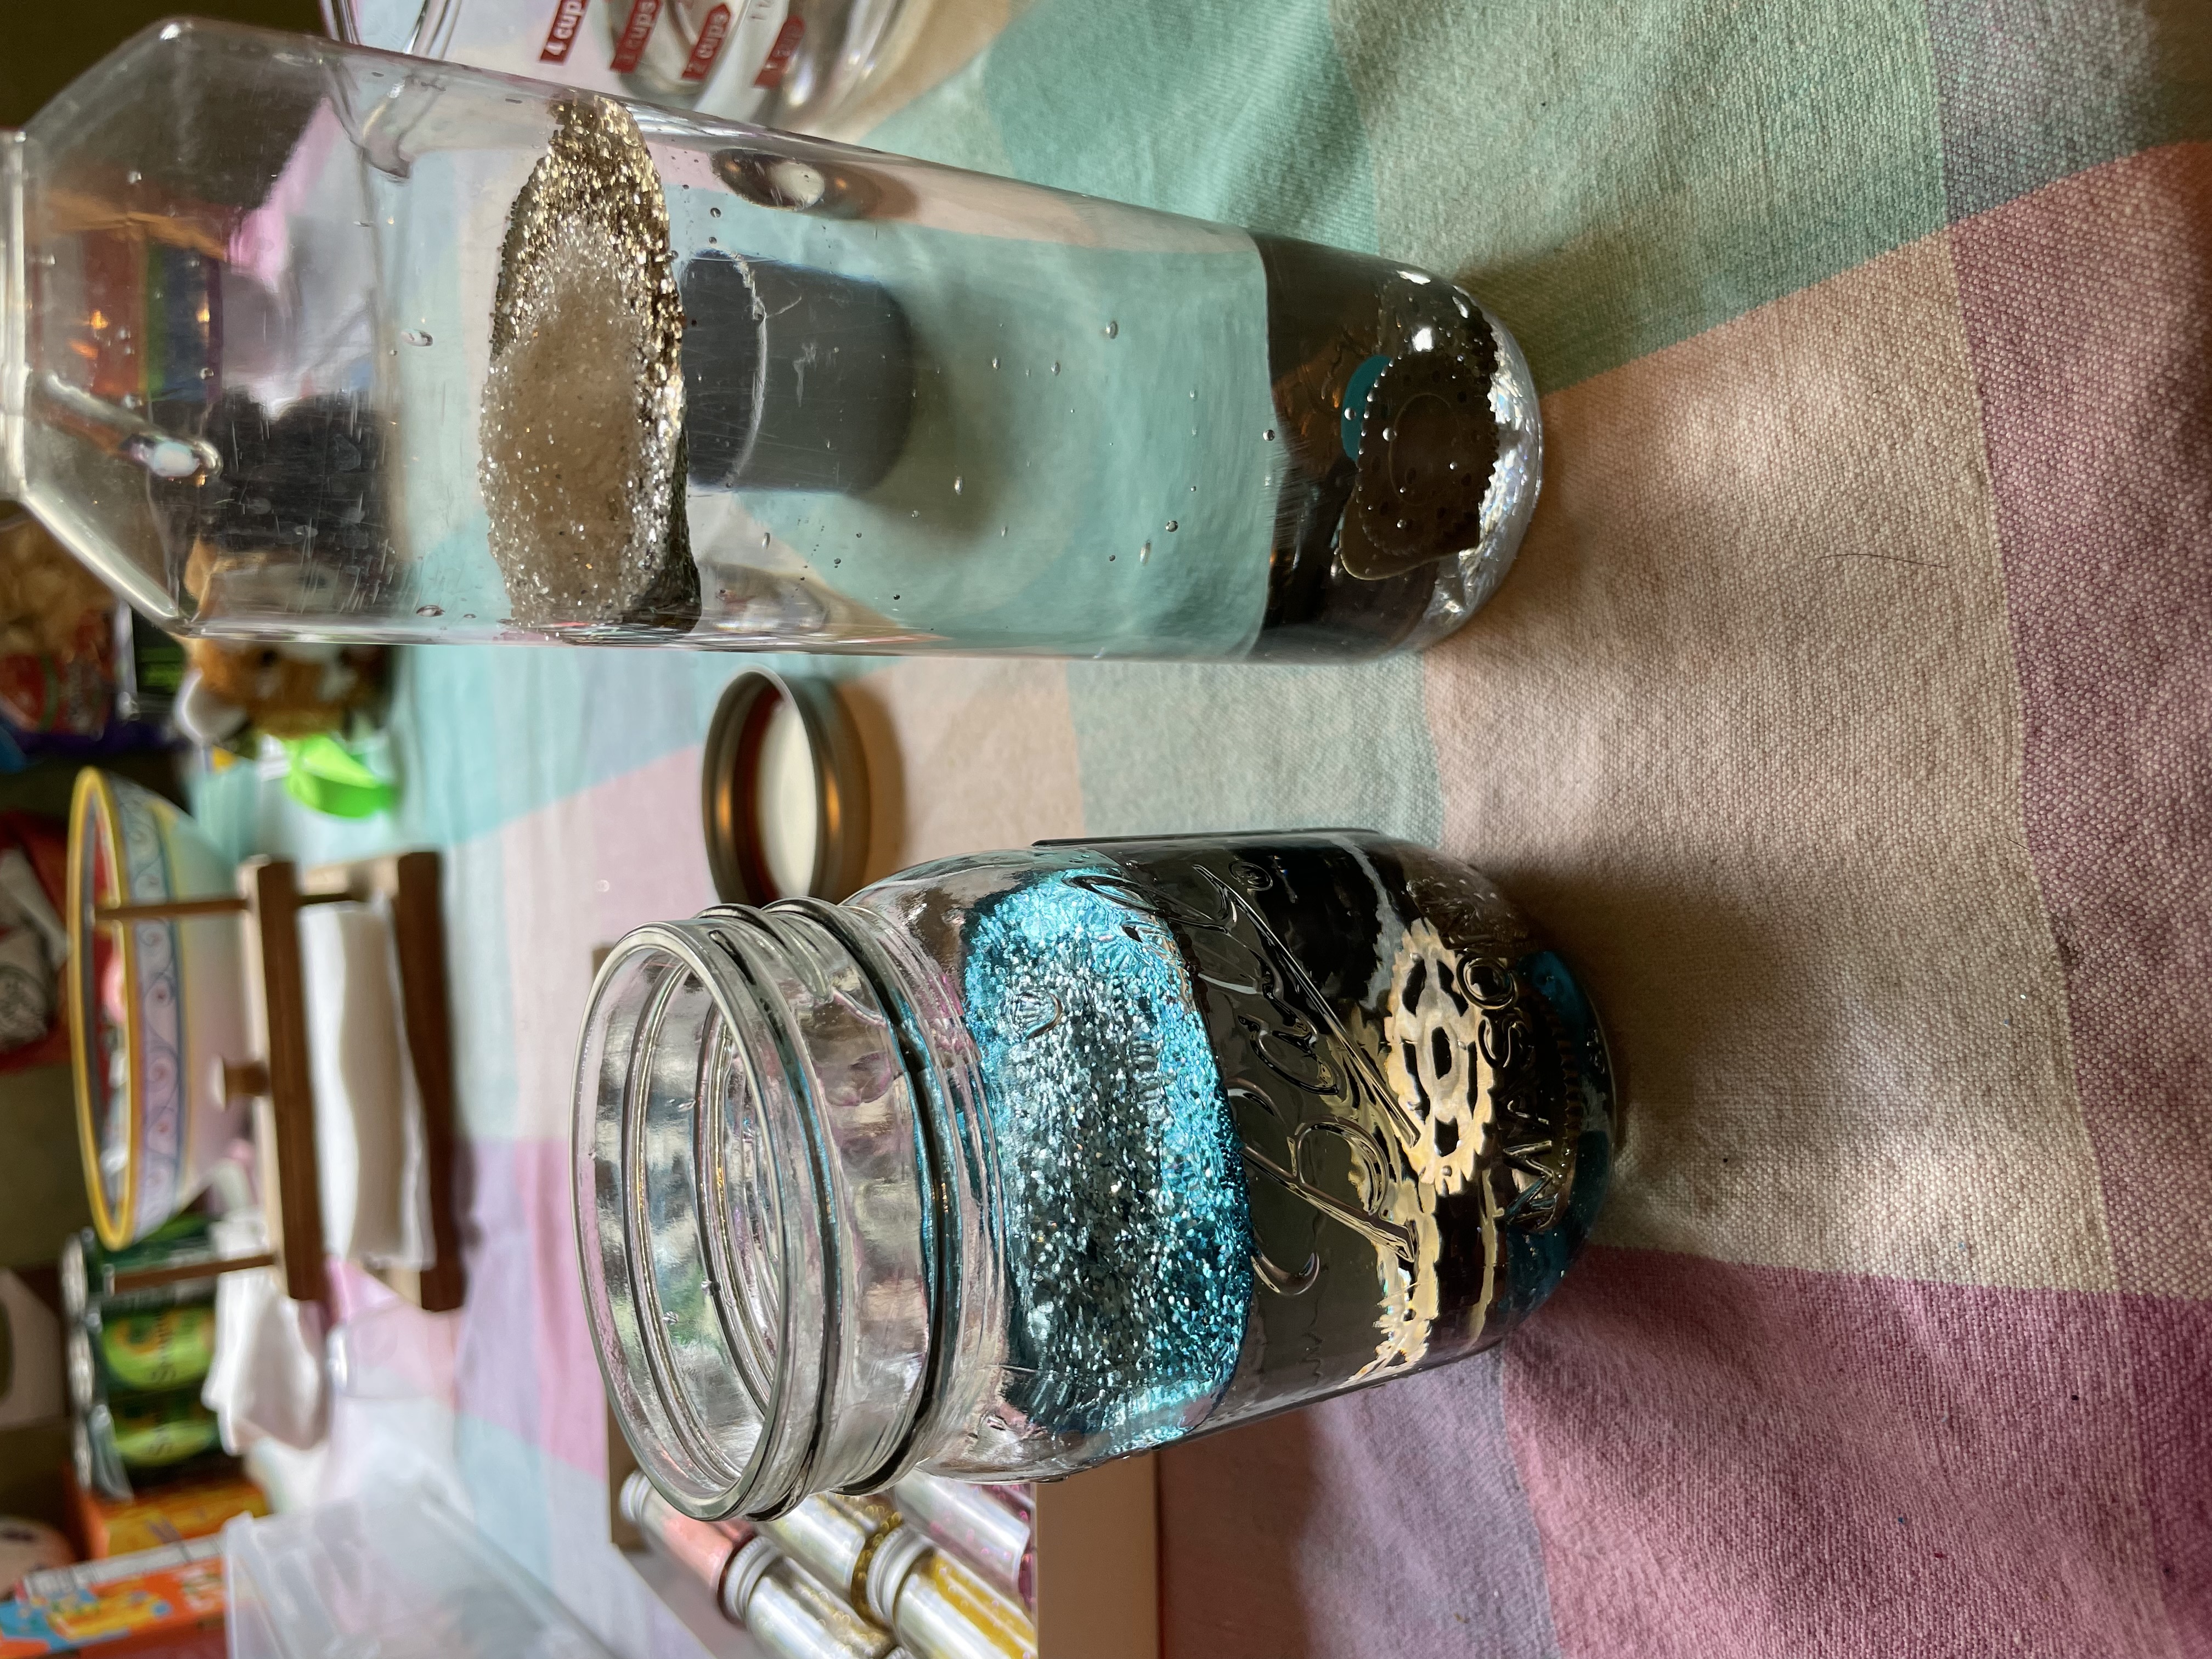 Glitter and other items have been added to two bottles of water and glue